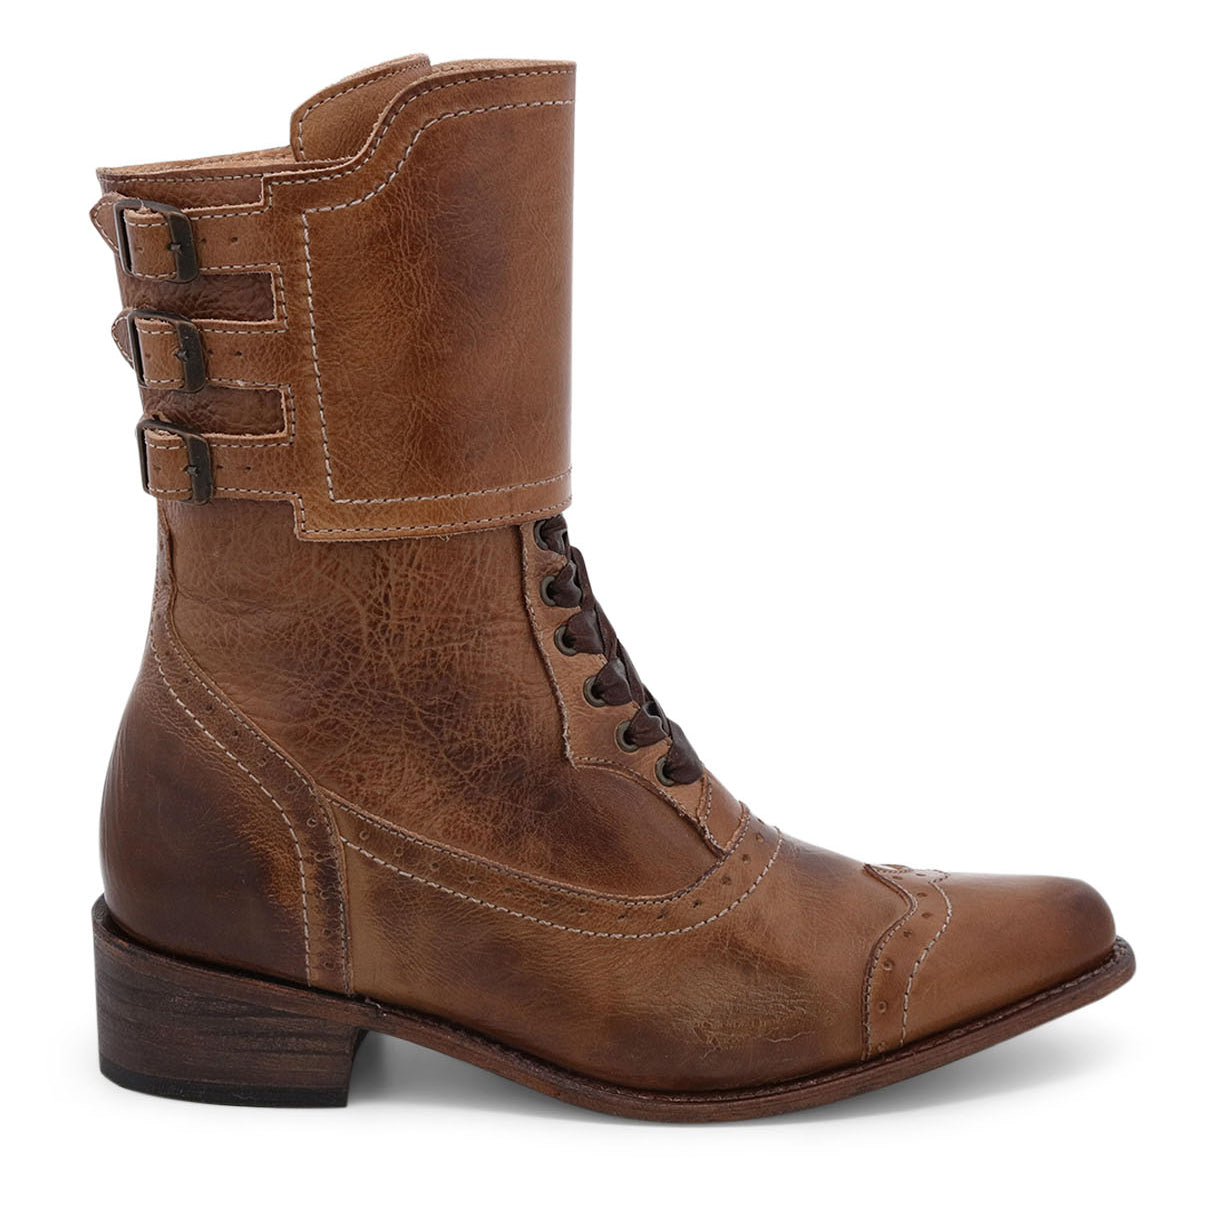 The Oak Tree Farms Faye riding boot is a handcrafted leather boot for women, featuring buckles and straps.